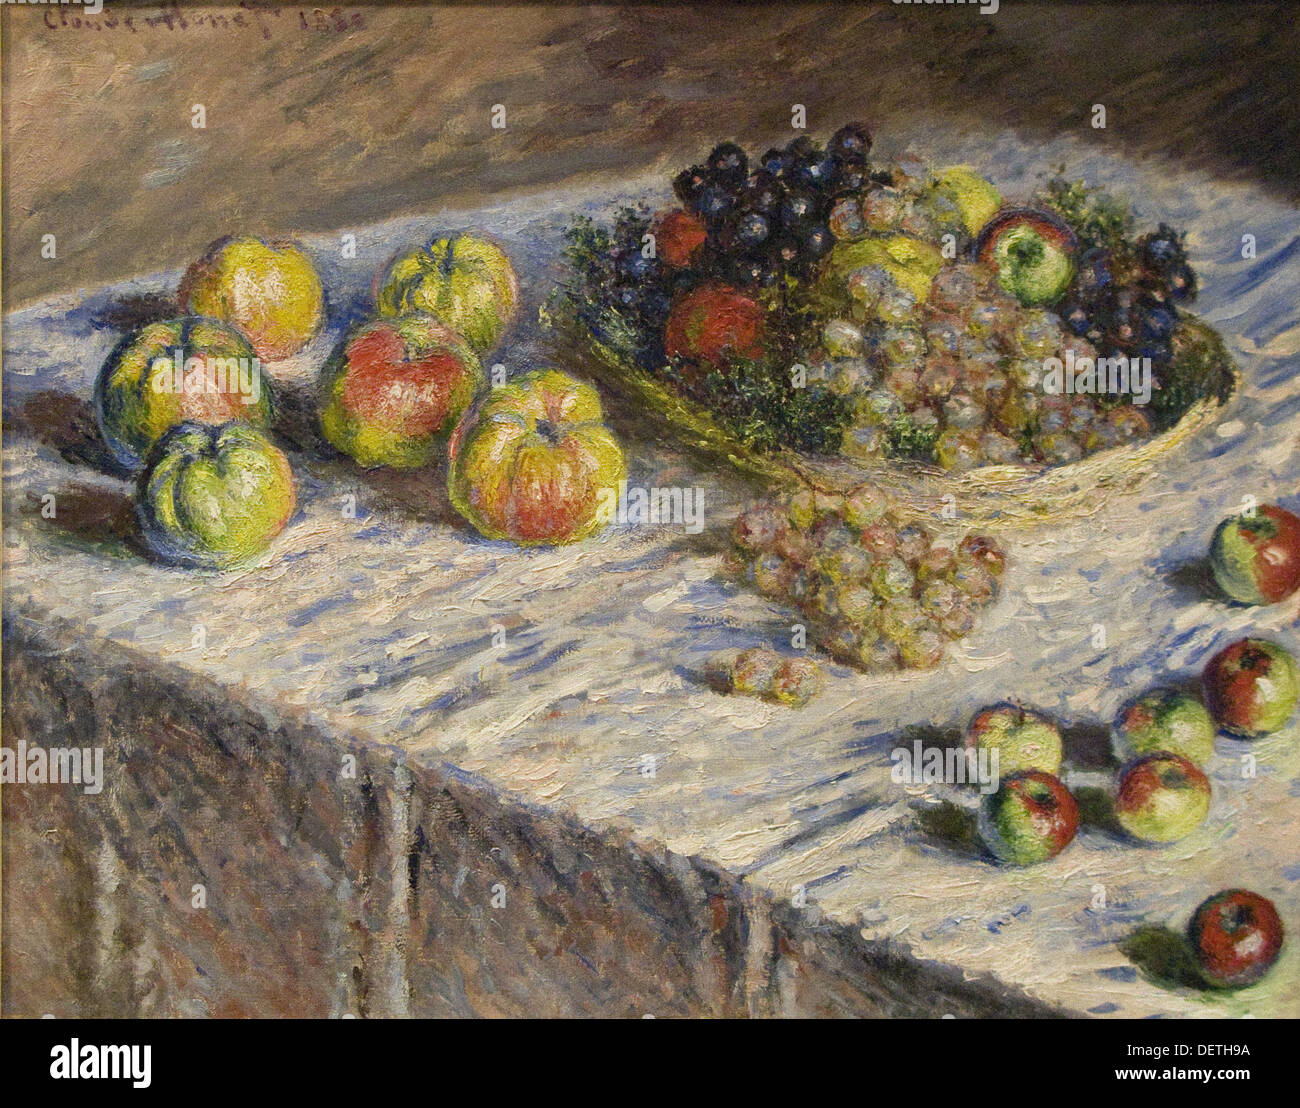 Claude Monet - Apples and Grapes - 1880 - The Art Institute of Chicago Stock Photo